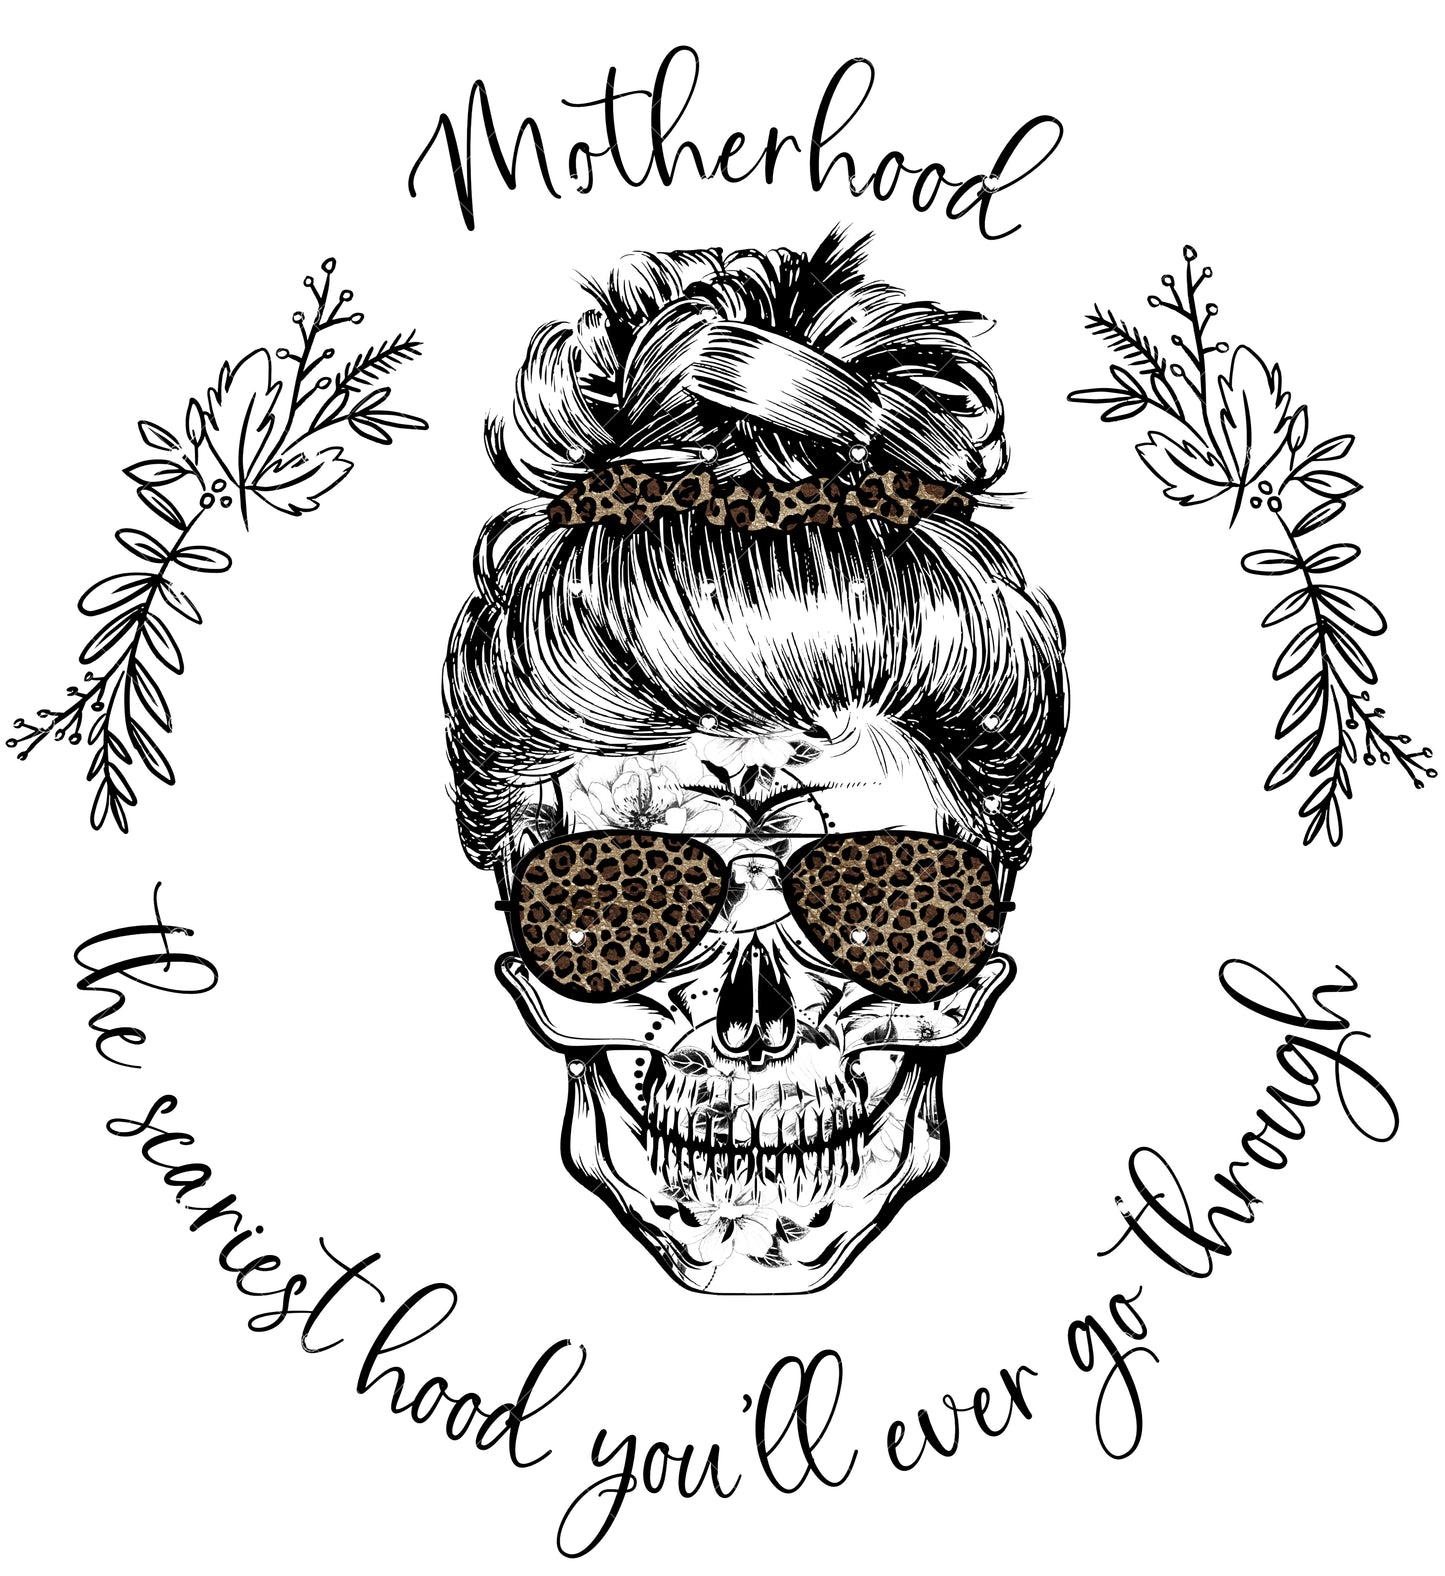 Motherhood the scariest hood Ready To Press Sublimation Transfer